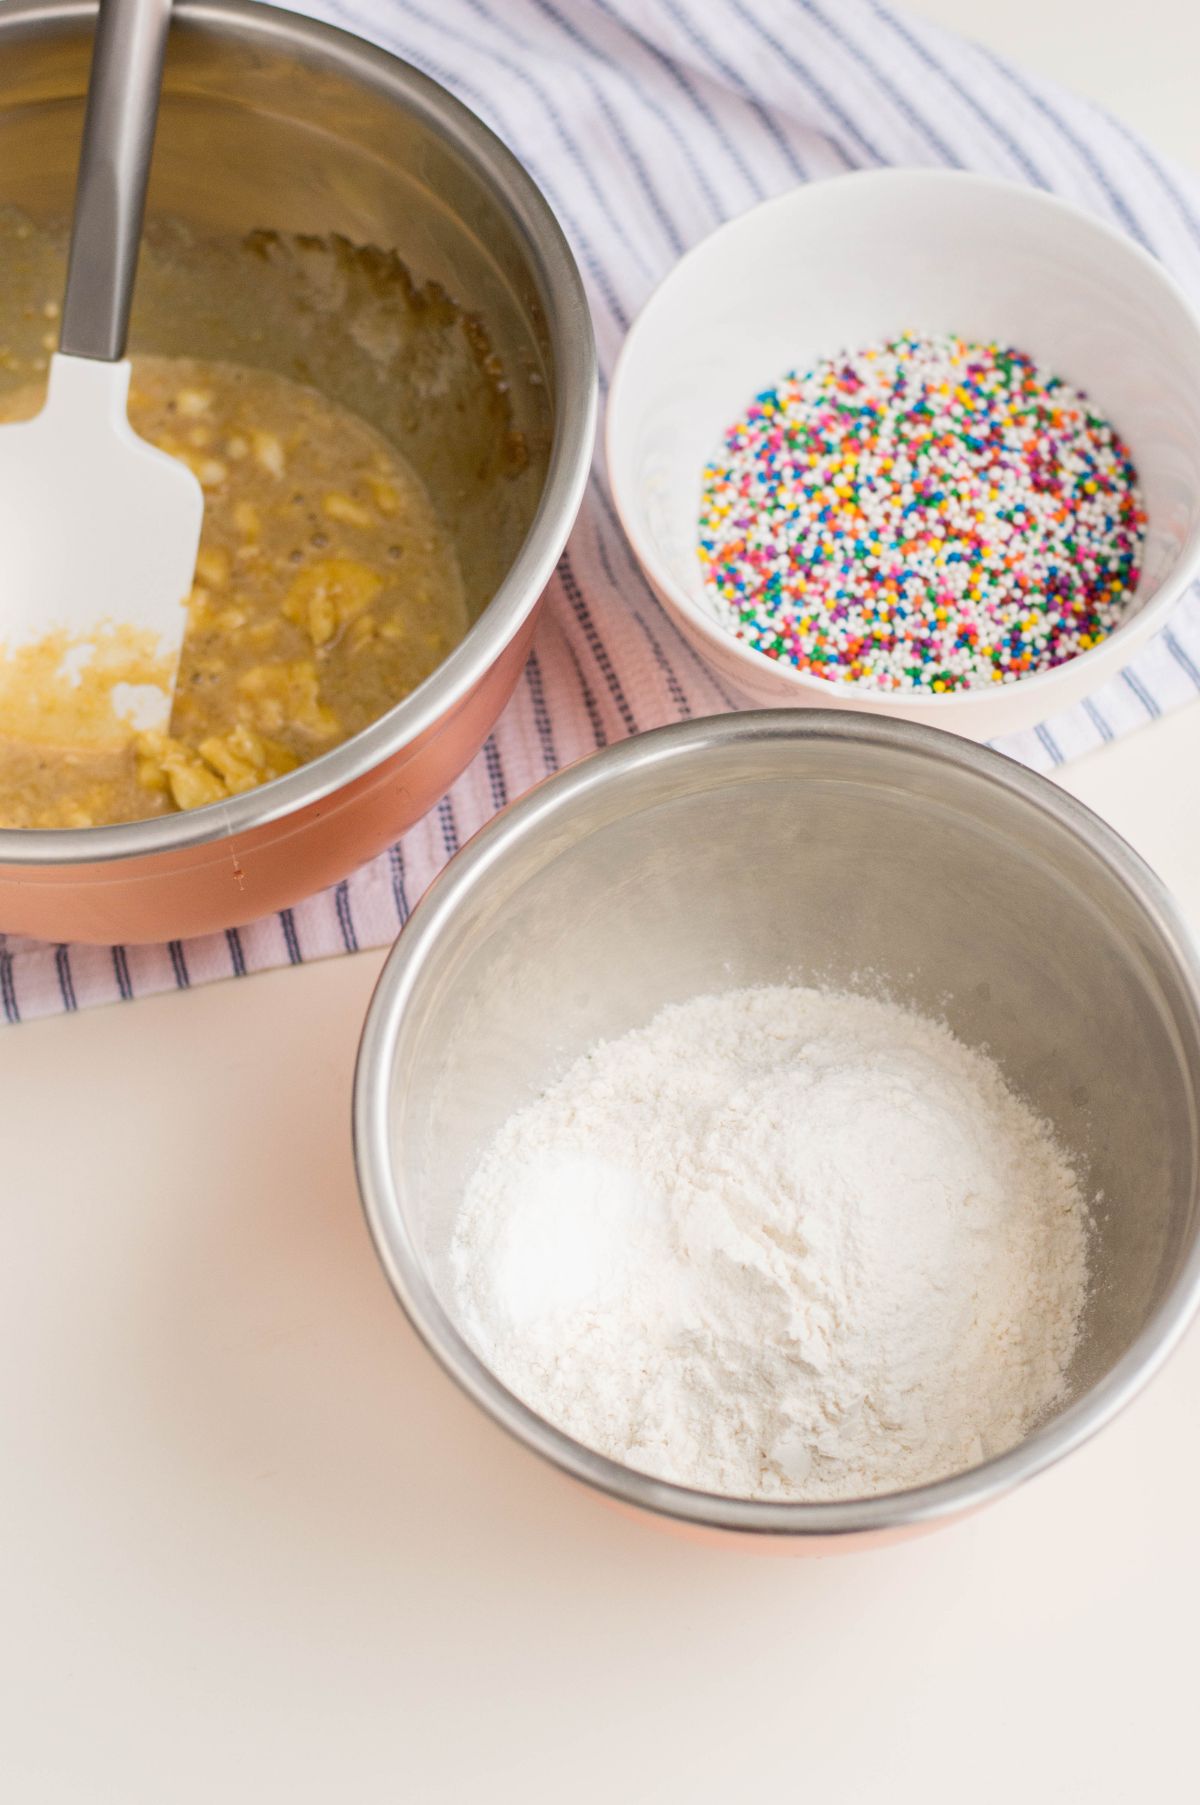 Ingredients used to make Funfetti cookies, the wet ingredients combined in a large bowl, dry ingredients in a smaller bowl, and the sprinkles in another smaller bowl.